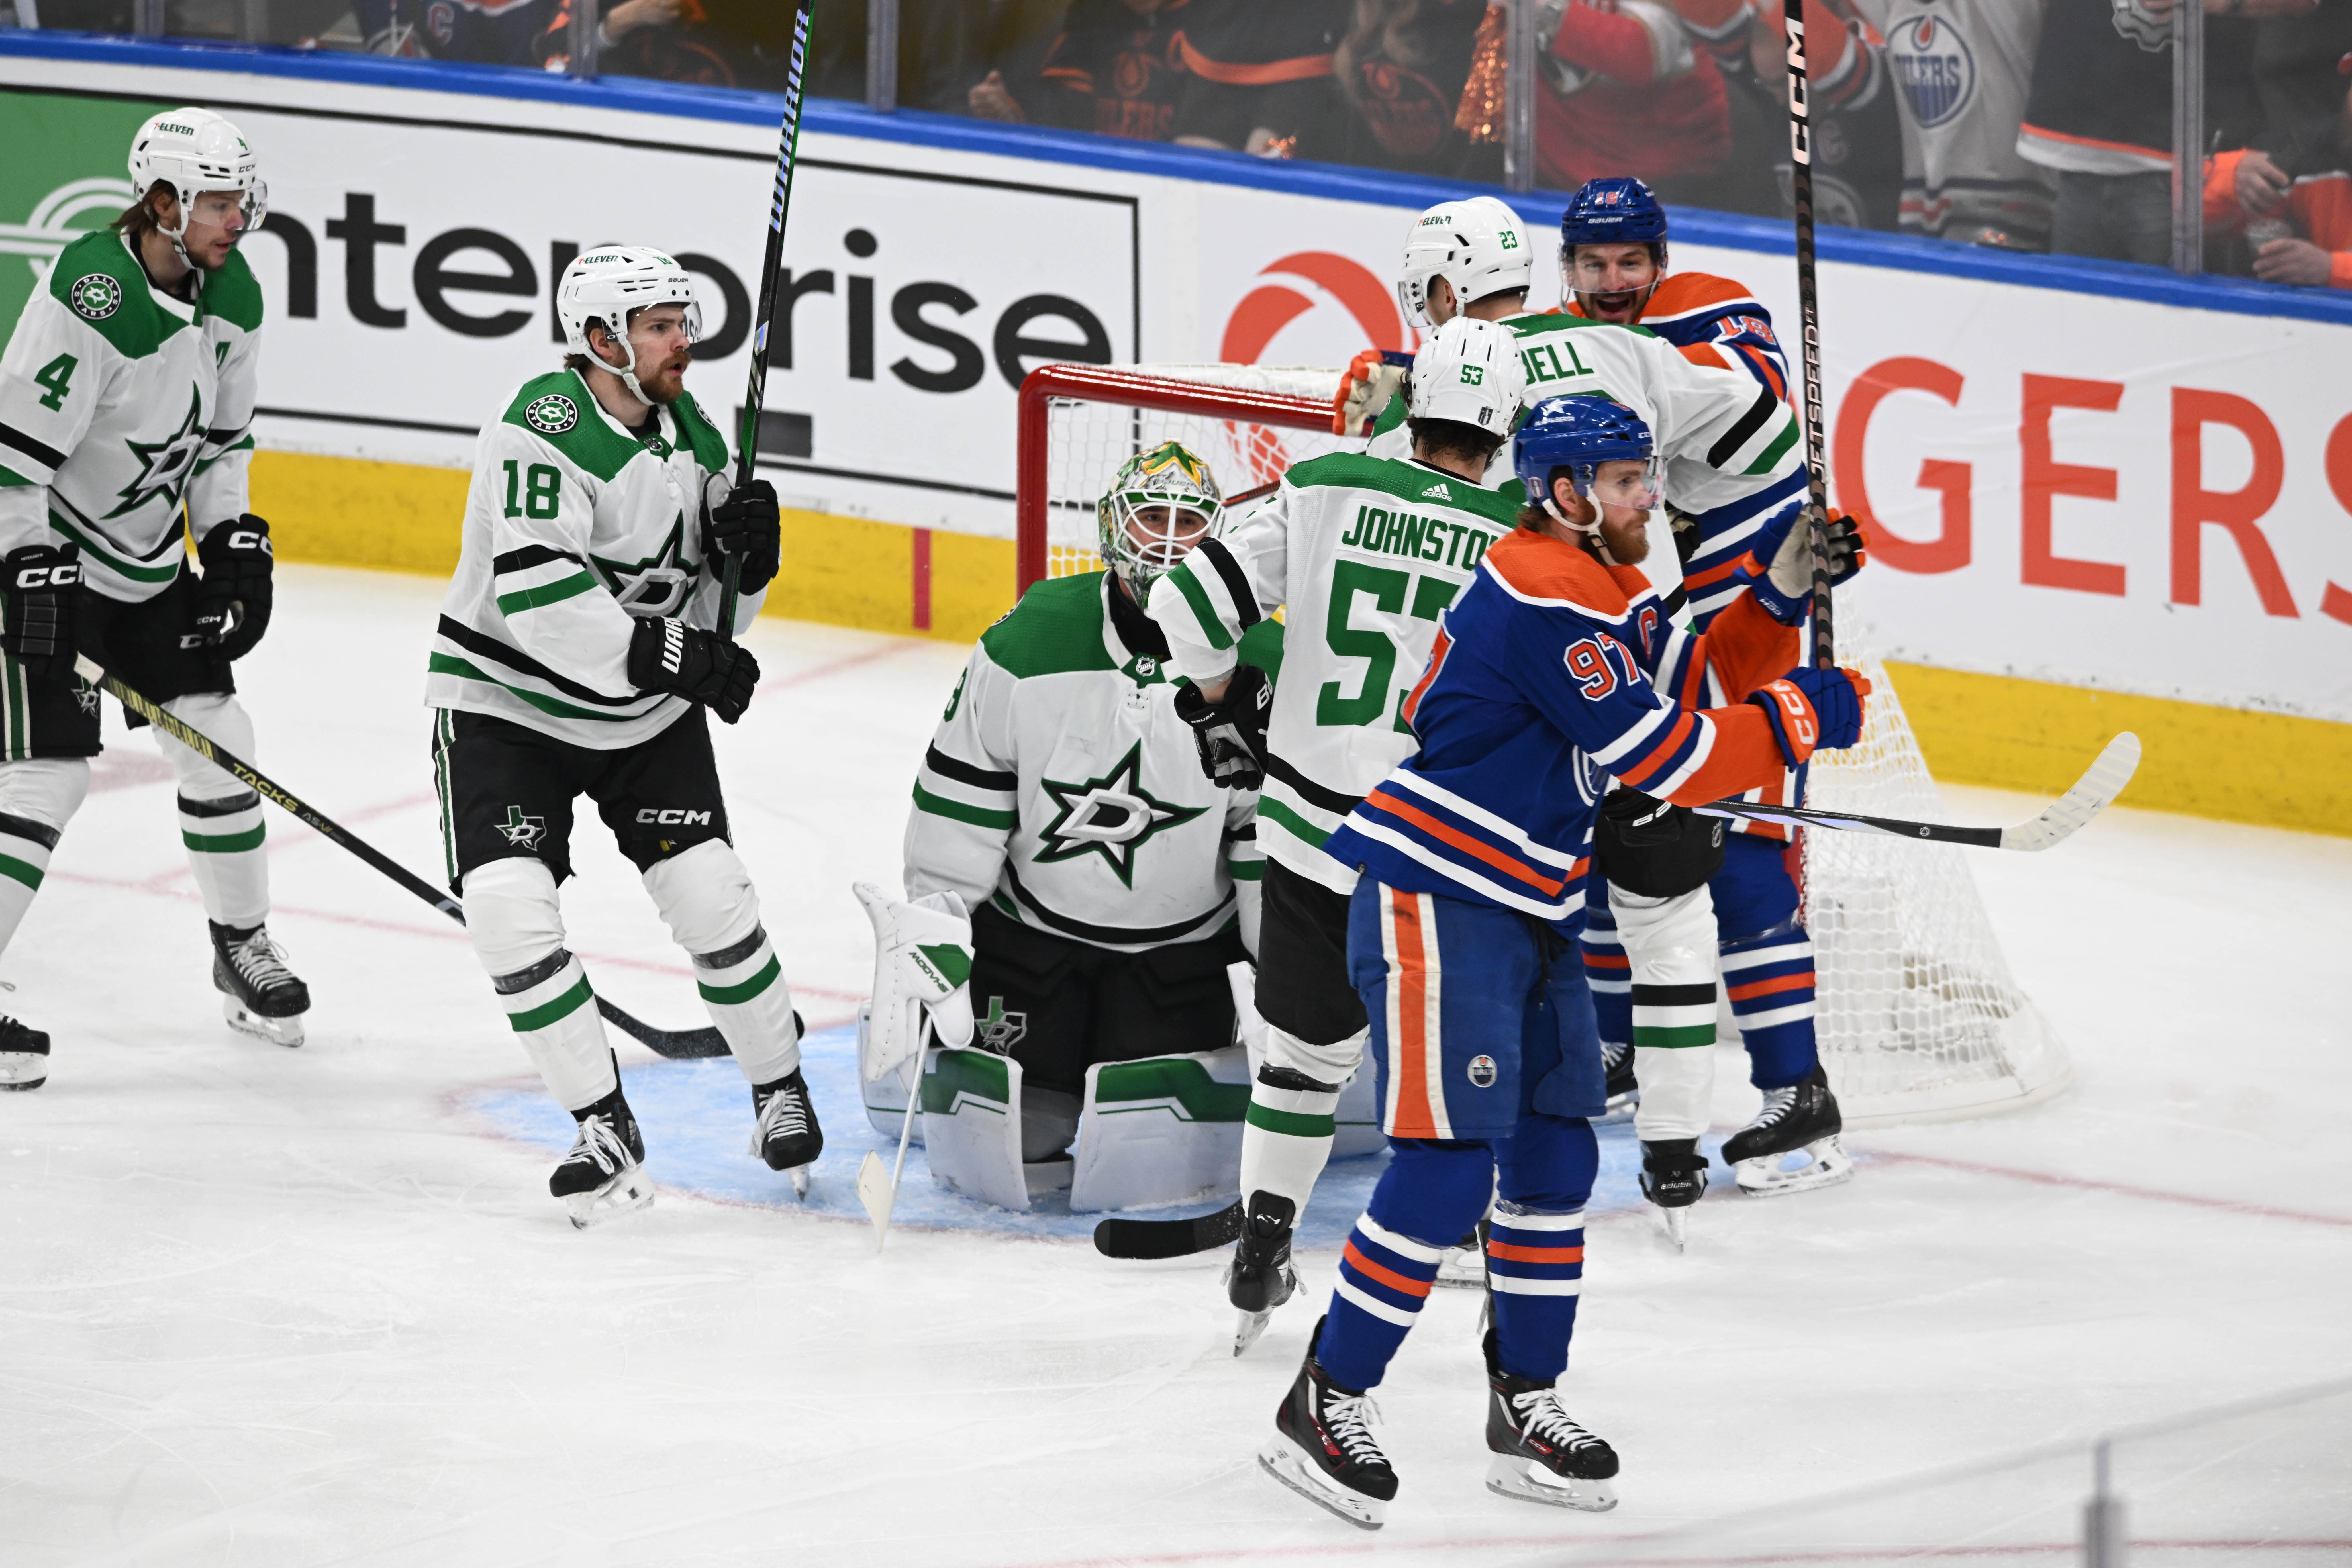 Edmonton Oilers reach Stanley Cup Final with Game 6 victory against Dallas Stars